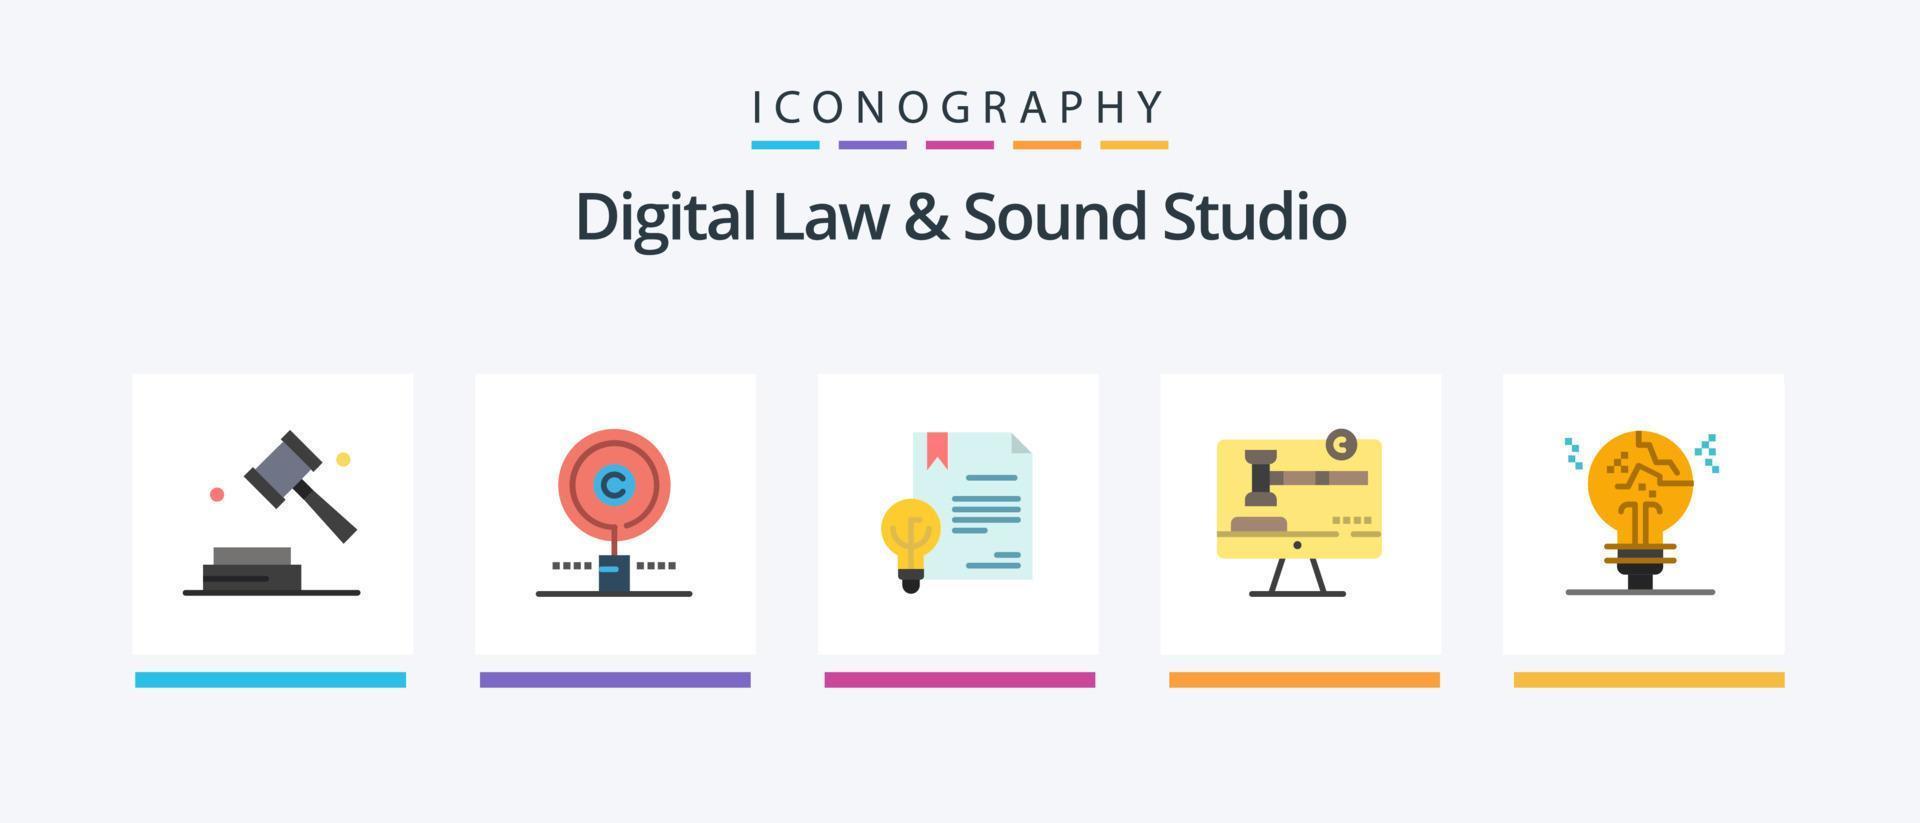 Digital Law And Sound Studio Flat 5 Icon Pack Including law. copyright. property. copy right. invention. Creative Icons Design vector